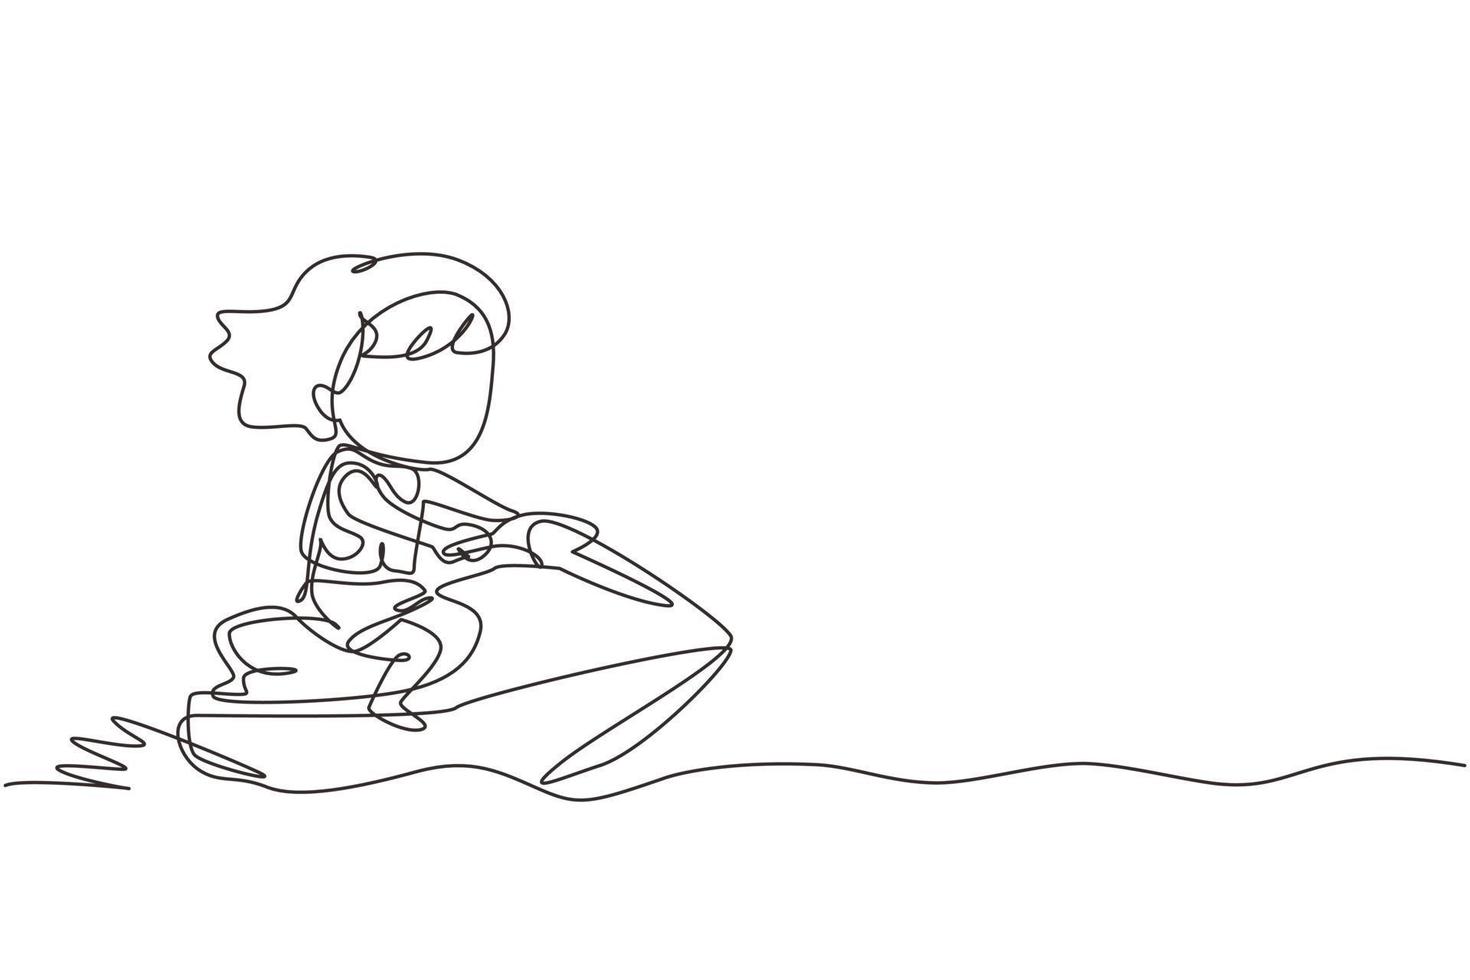 Continuous one line drawing little girl riding jet ski. Happy smiling child with rides water scooter on ocean waves. Summer water sport concept. Single line draw design vector graphic illustration